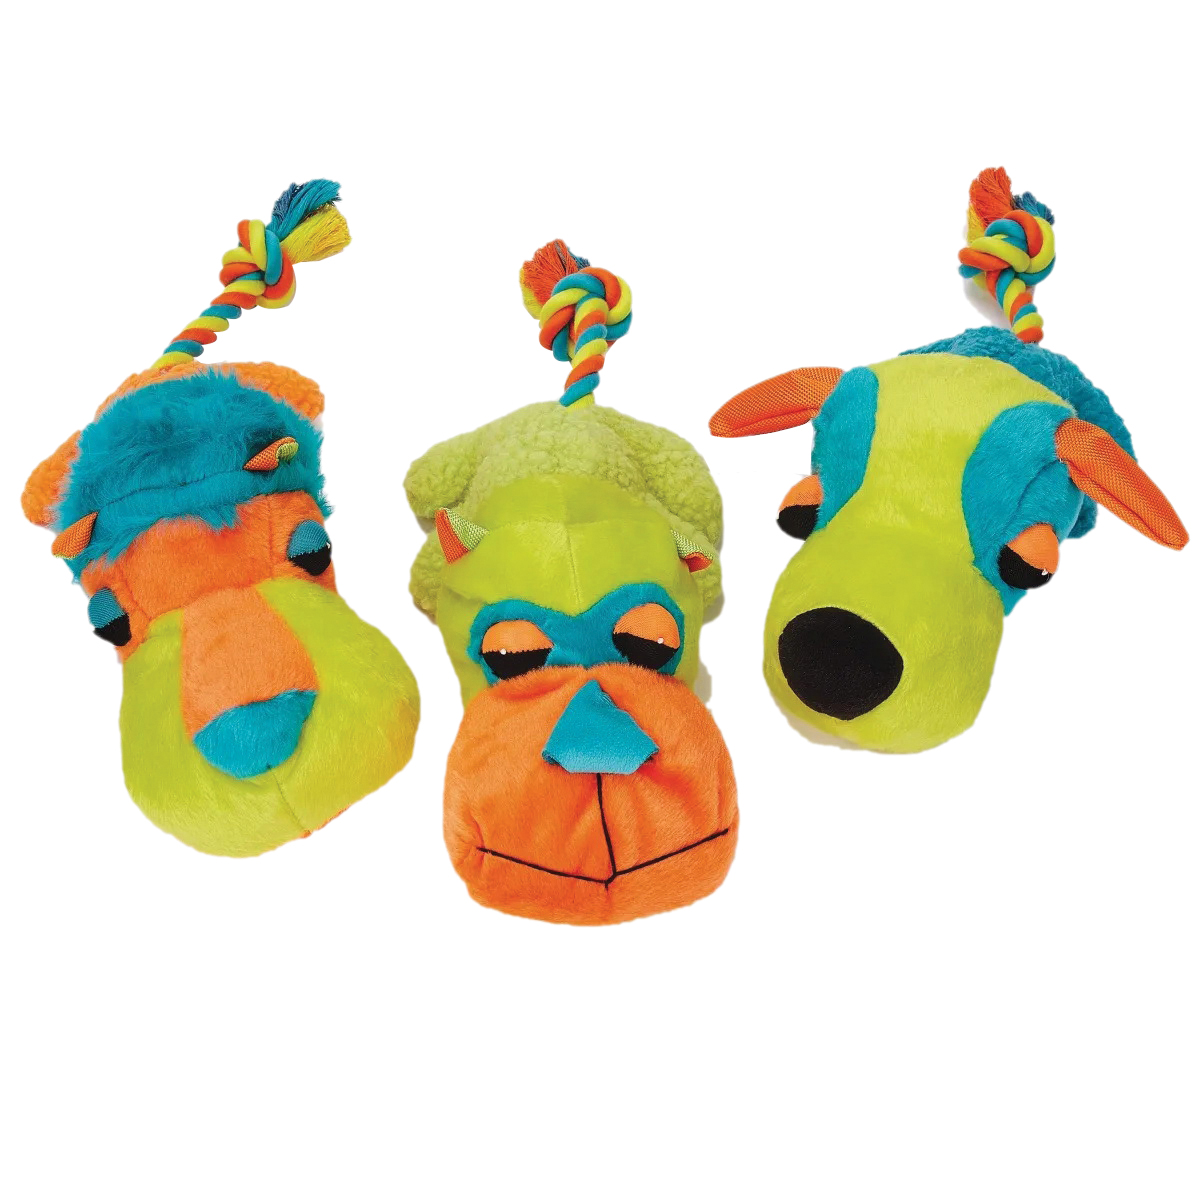 WB12280-9A Dog Toy, 15 in, Ultra Fat Headz Toy, Cotton/Polyfil/Plush/Squeaker, Assorted